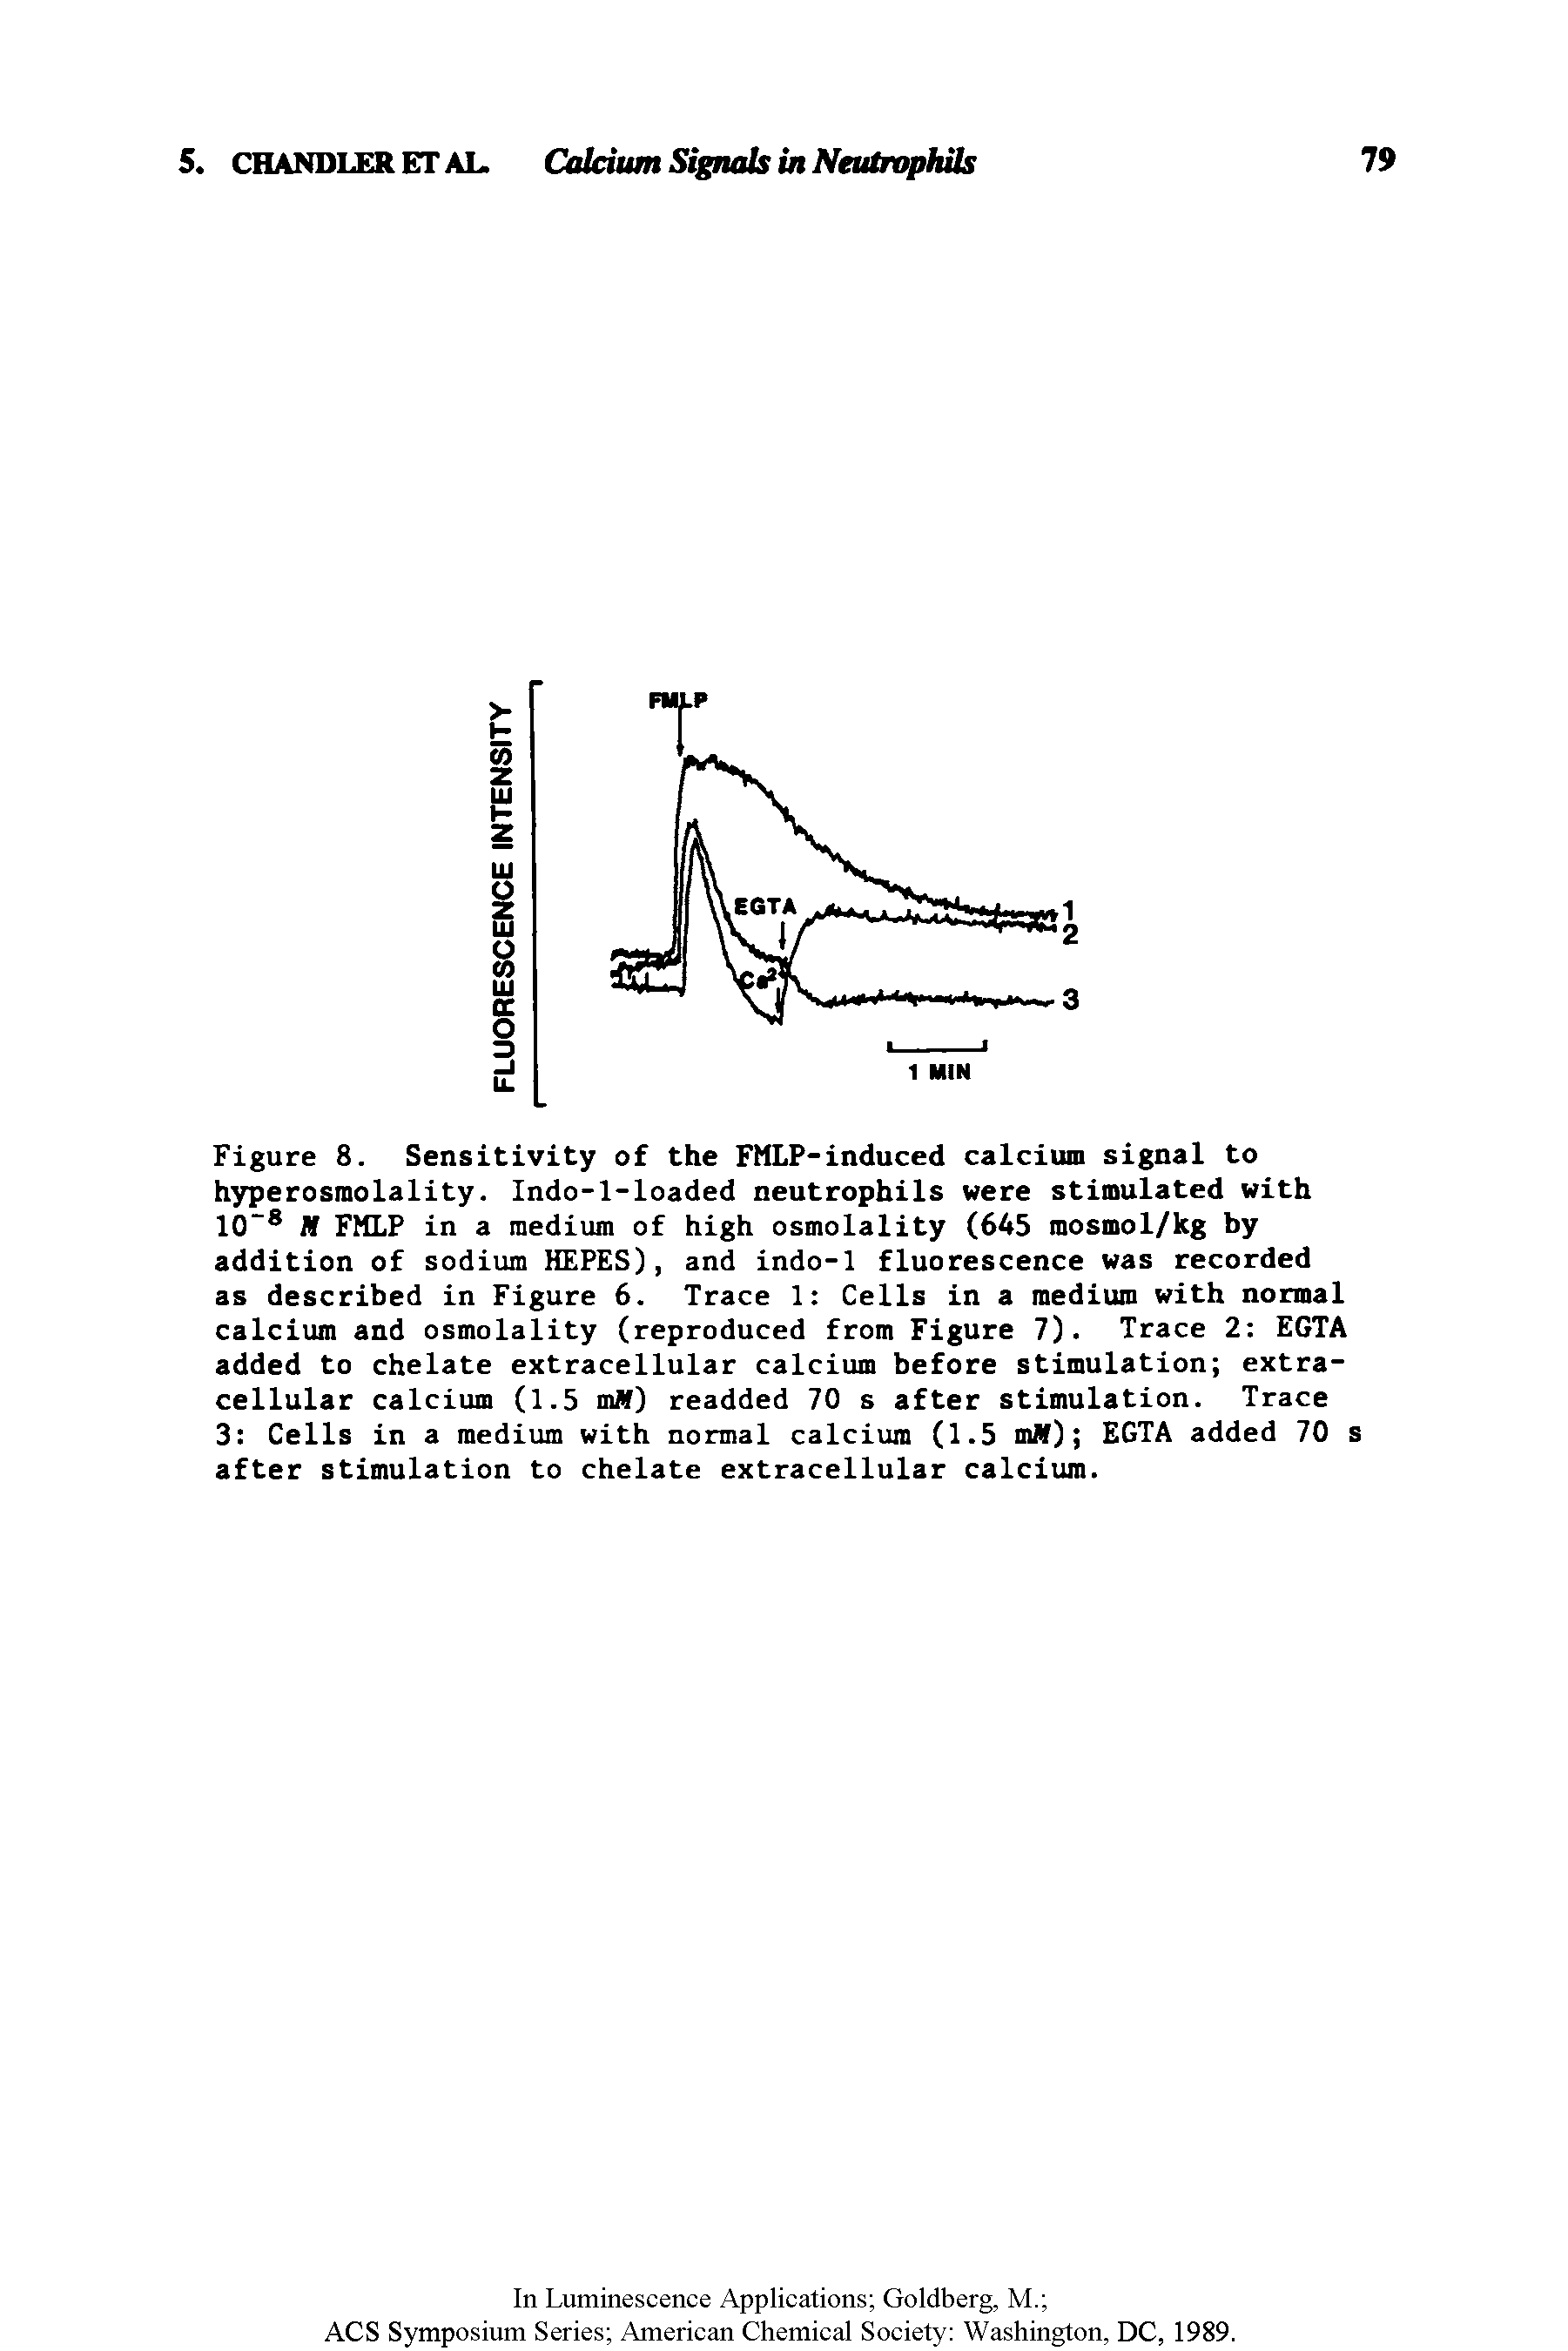 Figure 8. Sensitivity of the FMLP-induced calcium signal to hyperosmolality. Indo-l-loaded neutrophils were stimulated with 10 M FMLP in a medium of high osmolality (645 mosmol/kg by addition of sodium HEPES), and indo-1 fluorescence was recorded as described in Figure 6. Trace 1 Cells in a medium with normal calcium and osmolality (reproduced from Figure 7). Trace 2 EGTA added to chelate extracellular calcium before stimulation extracellular calcium (1.5 miV) readded 70 s after stimulation. Trace 3 Cells in a medium with normal calcium (1.5 mW) EGTA added 70 s after stimulation to chelate extracellular calcium.